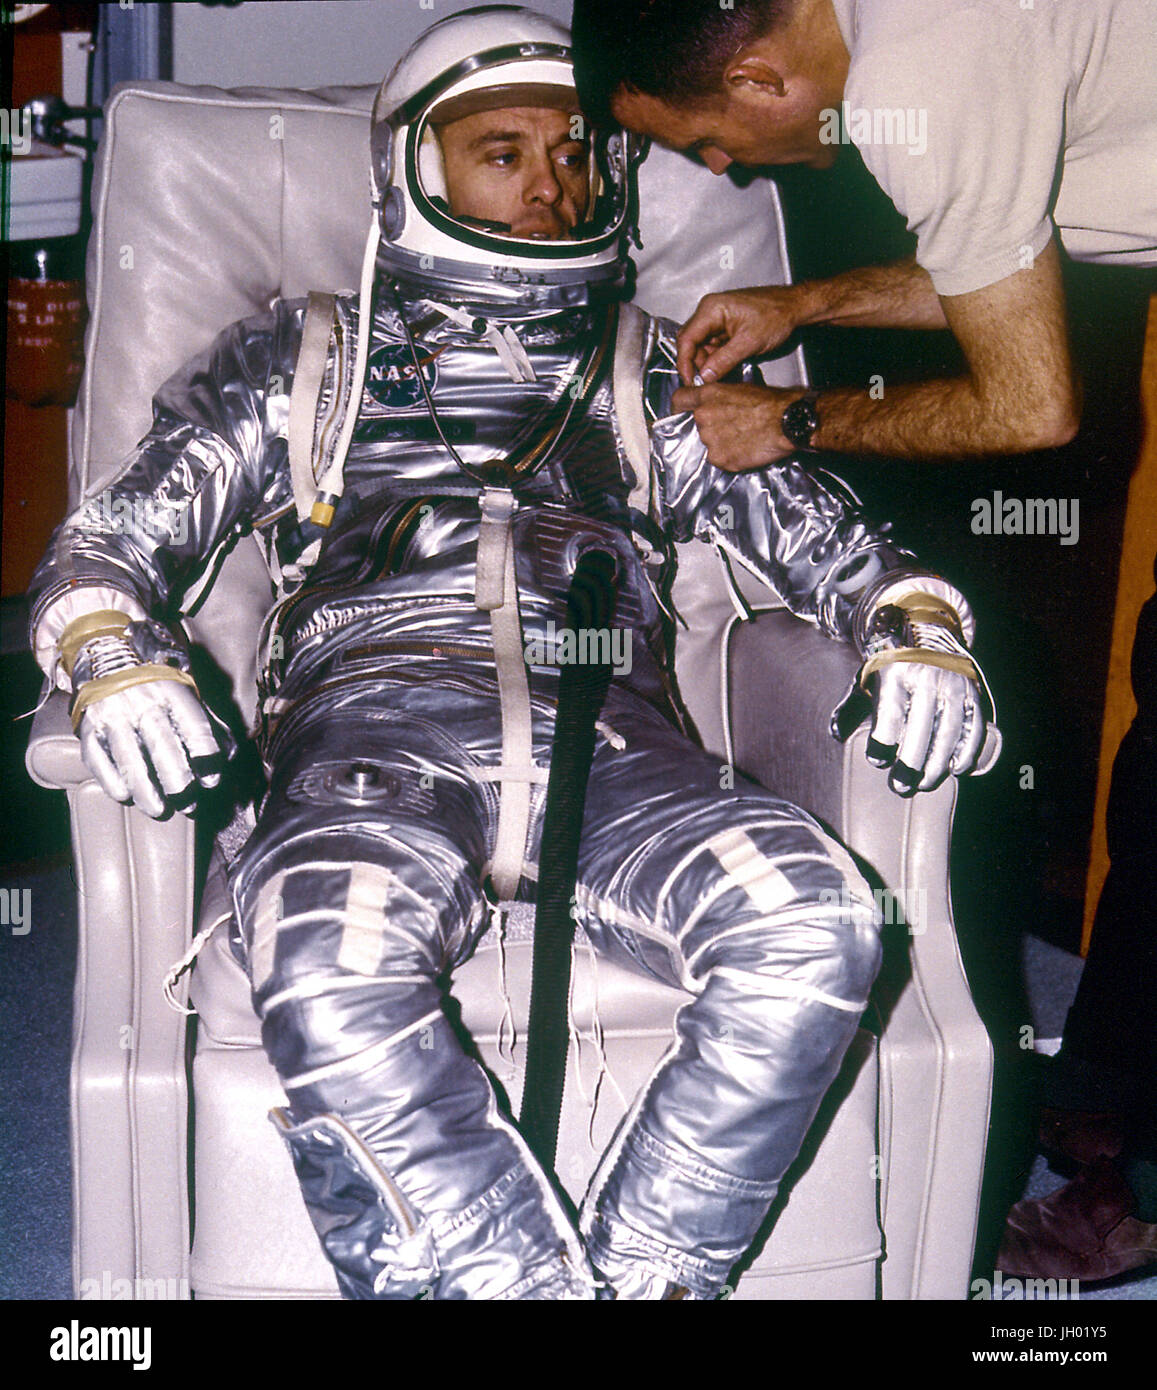 Astronaut Alan B. Shepard, Jr. During Suiting for First Manned Suborbital Flight on MR-3 (Mercury-Redstone).Freedom 7, on May 5, 1961 NASA Photo Stock Photo